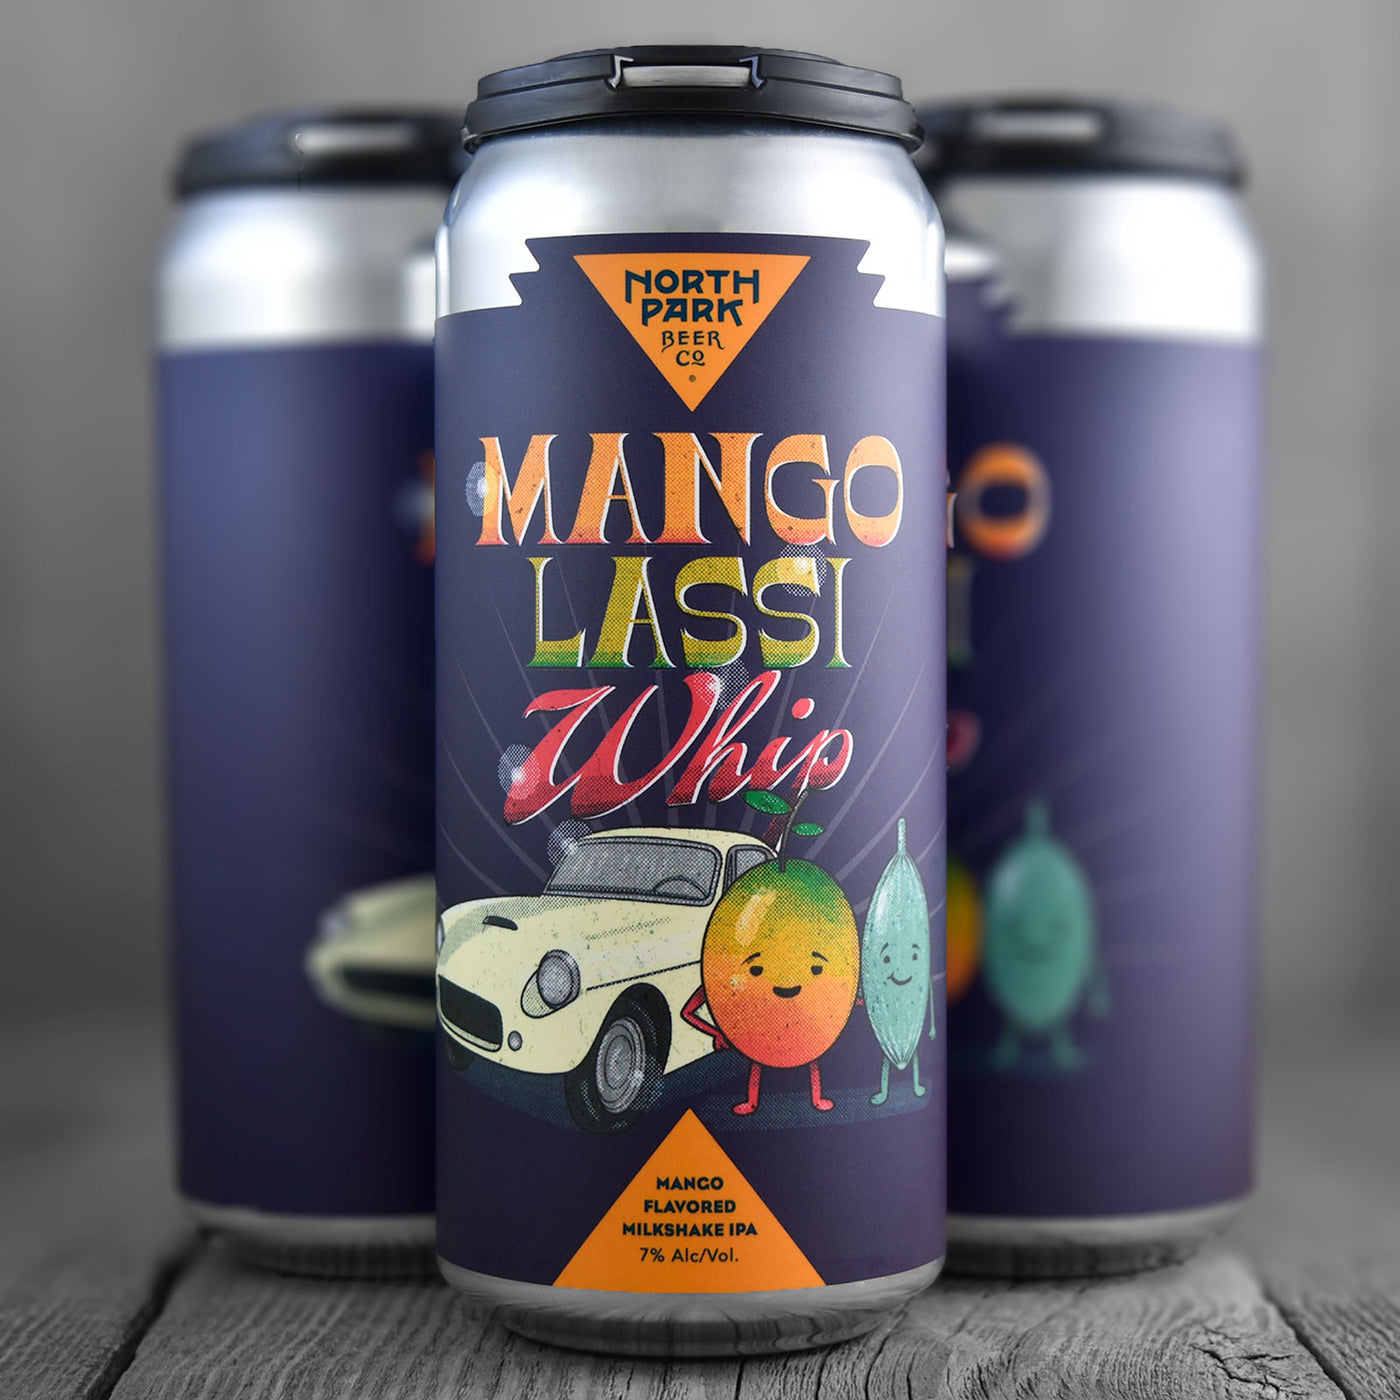 North Park Beer Co. Mango Lassi Whip